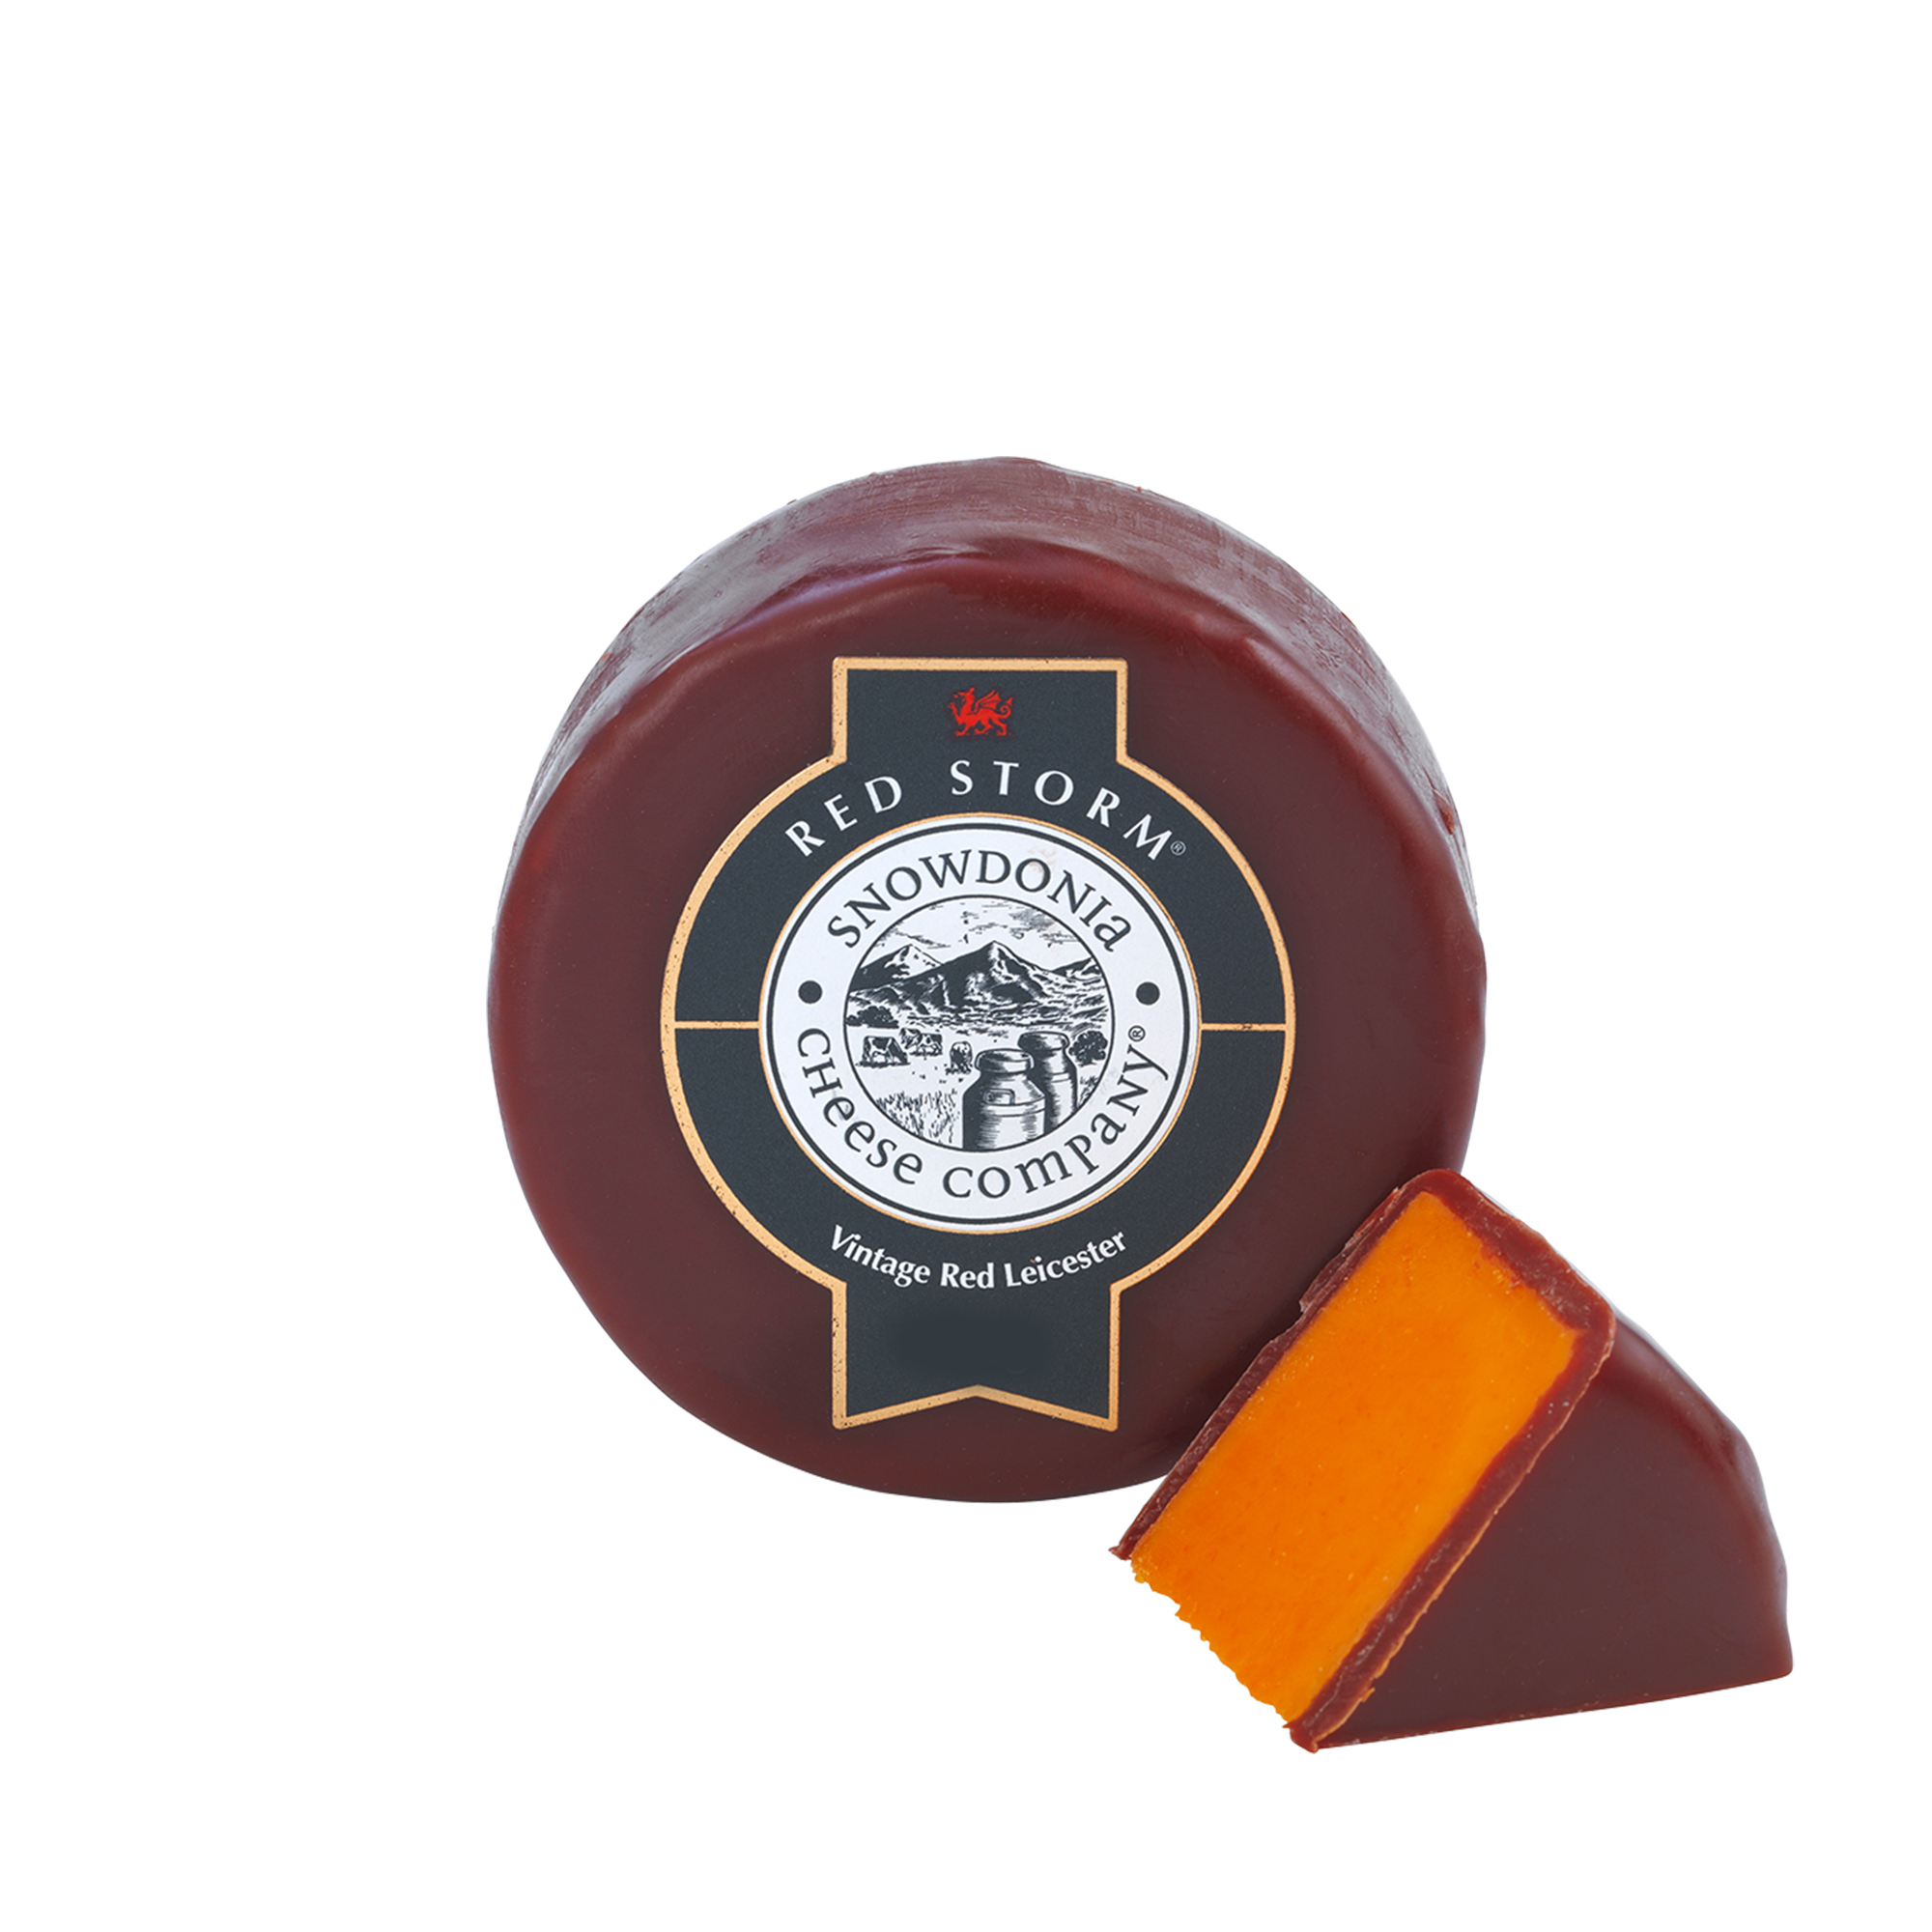 RED STORM® Vintage Red Leicester